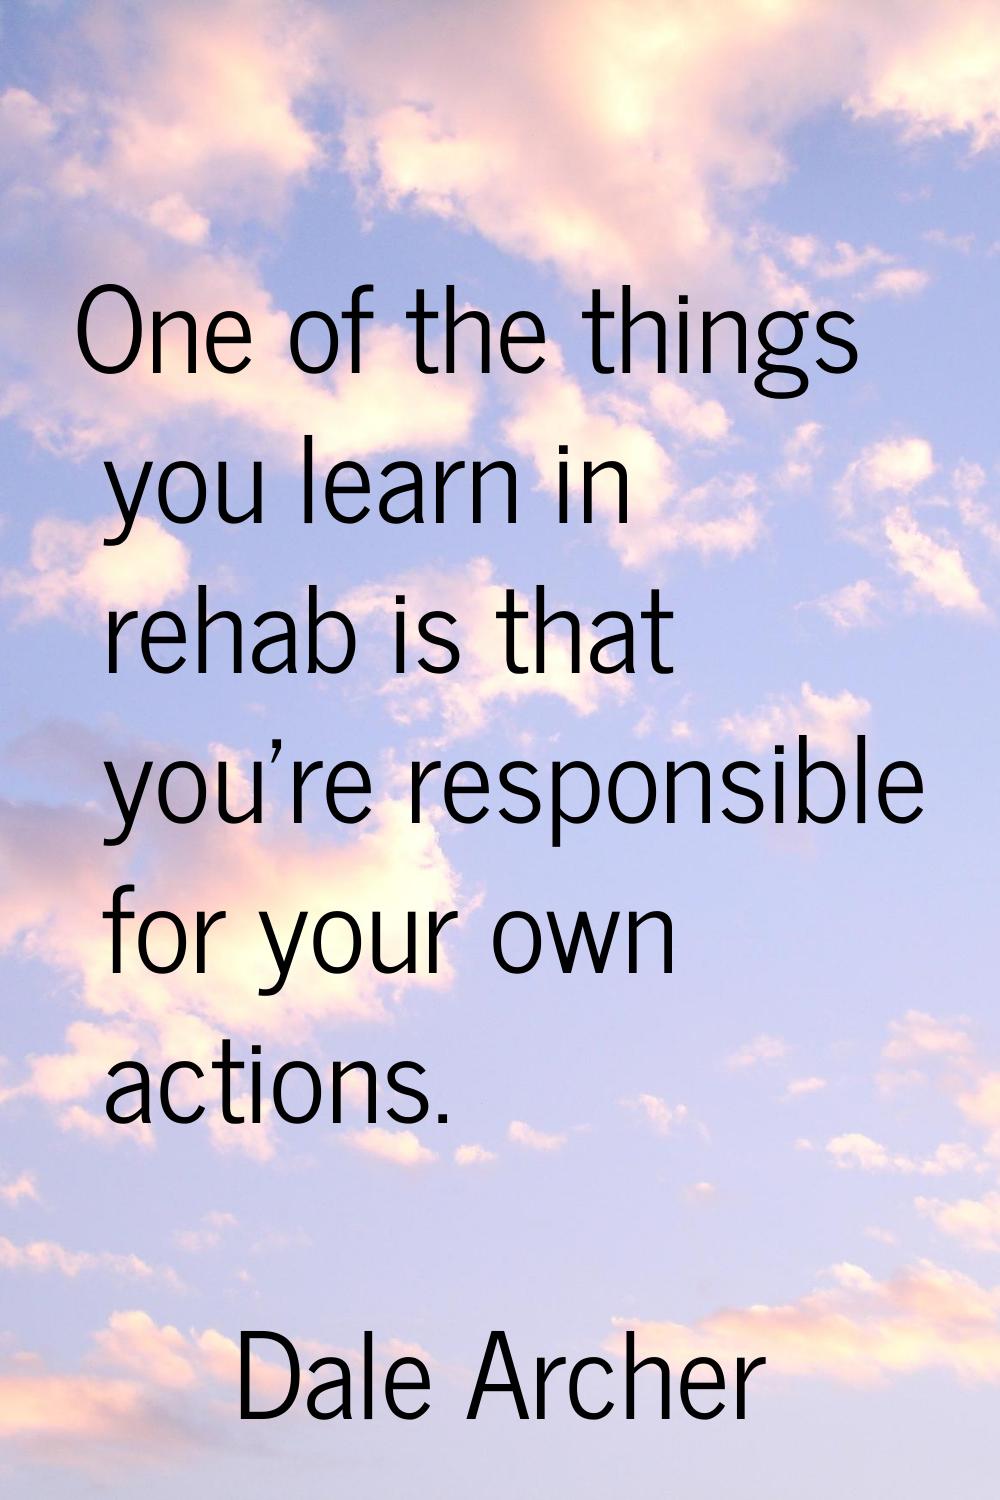 One of the things you learn in rehab is that you're responsible for your own actions.